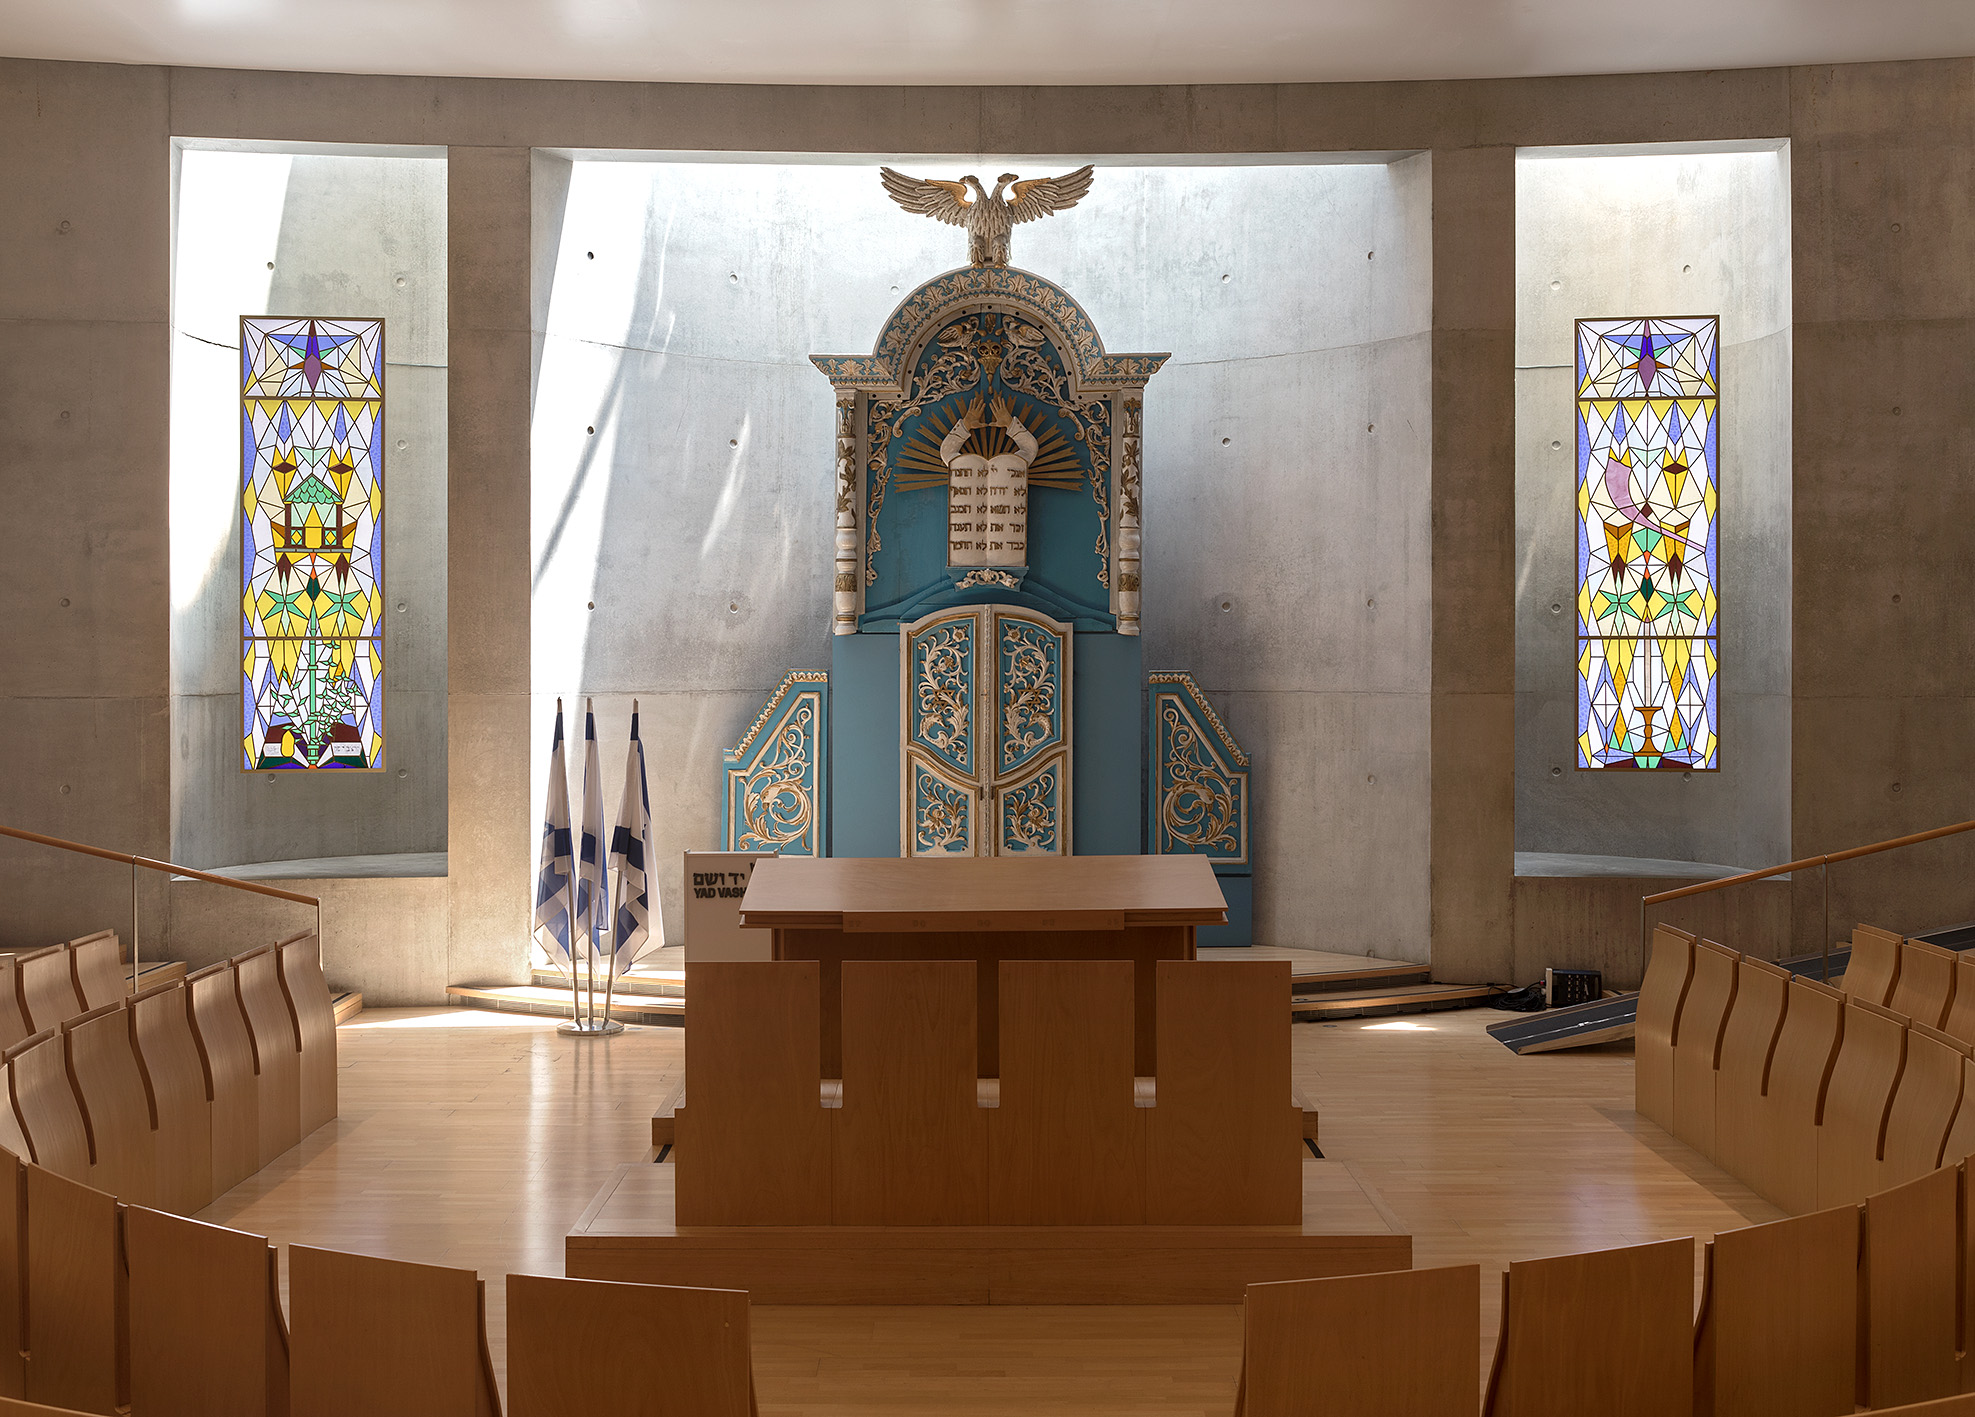 Coming Full Circle: Stained-Glass Windows Adorn a Synagogue Once Again